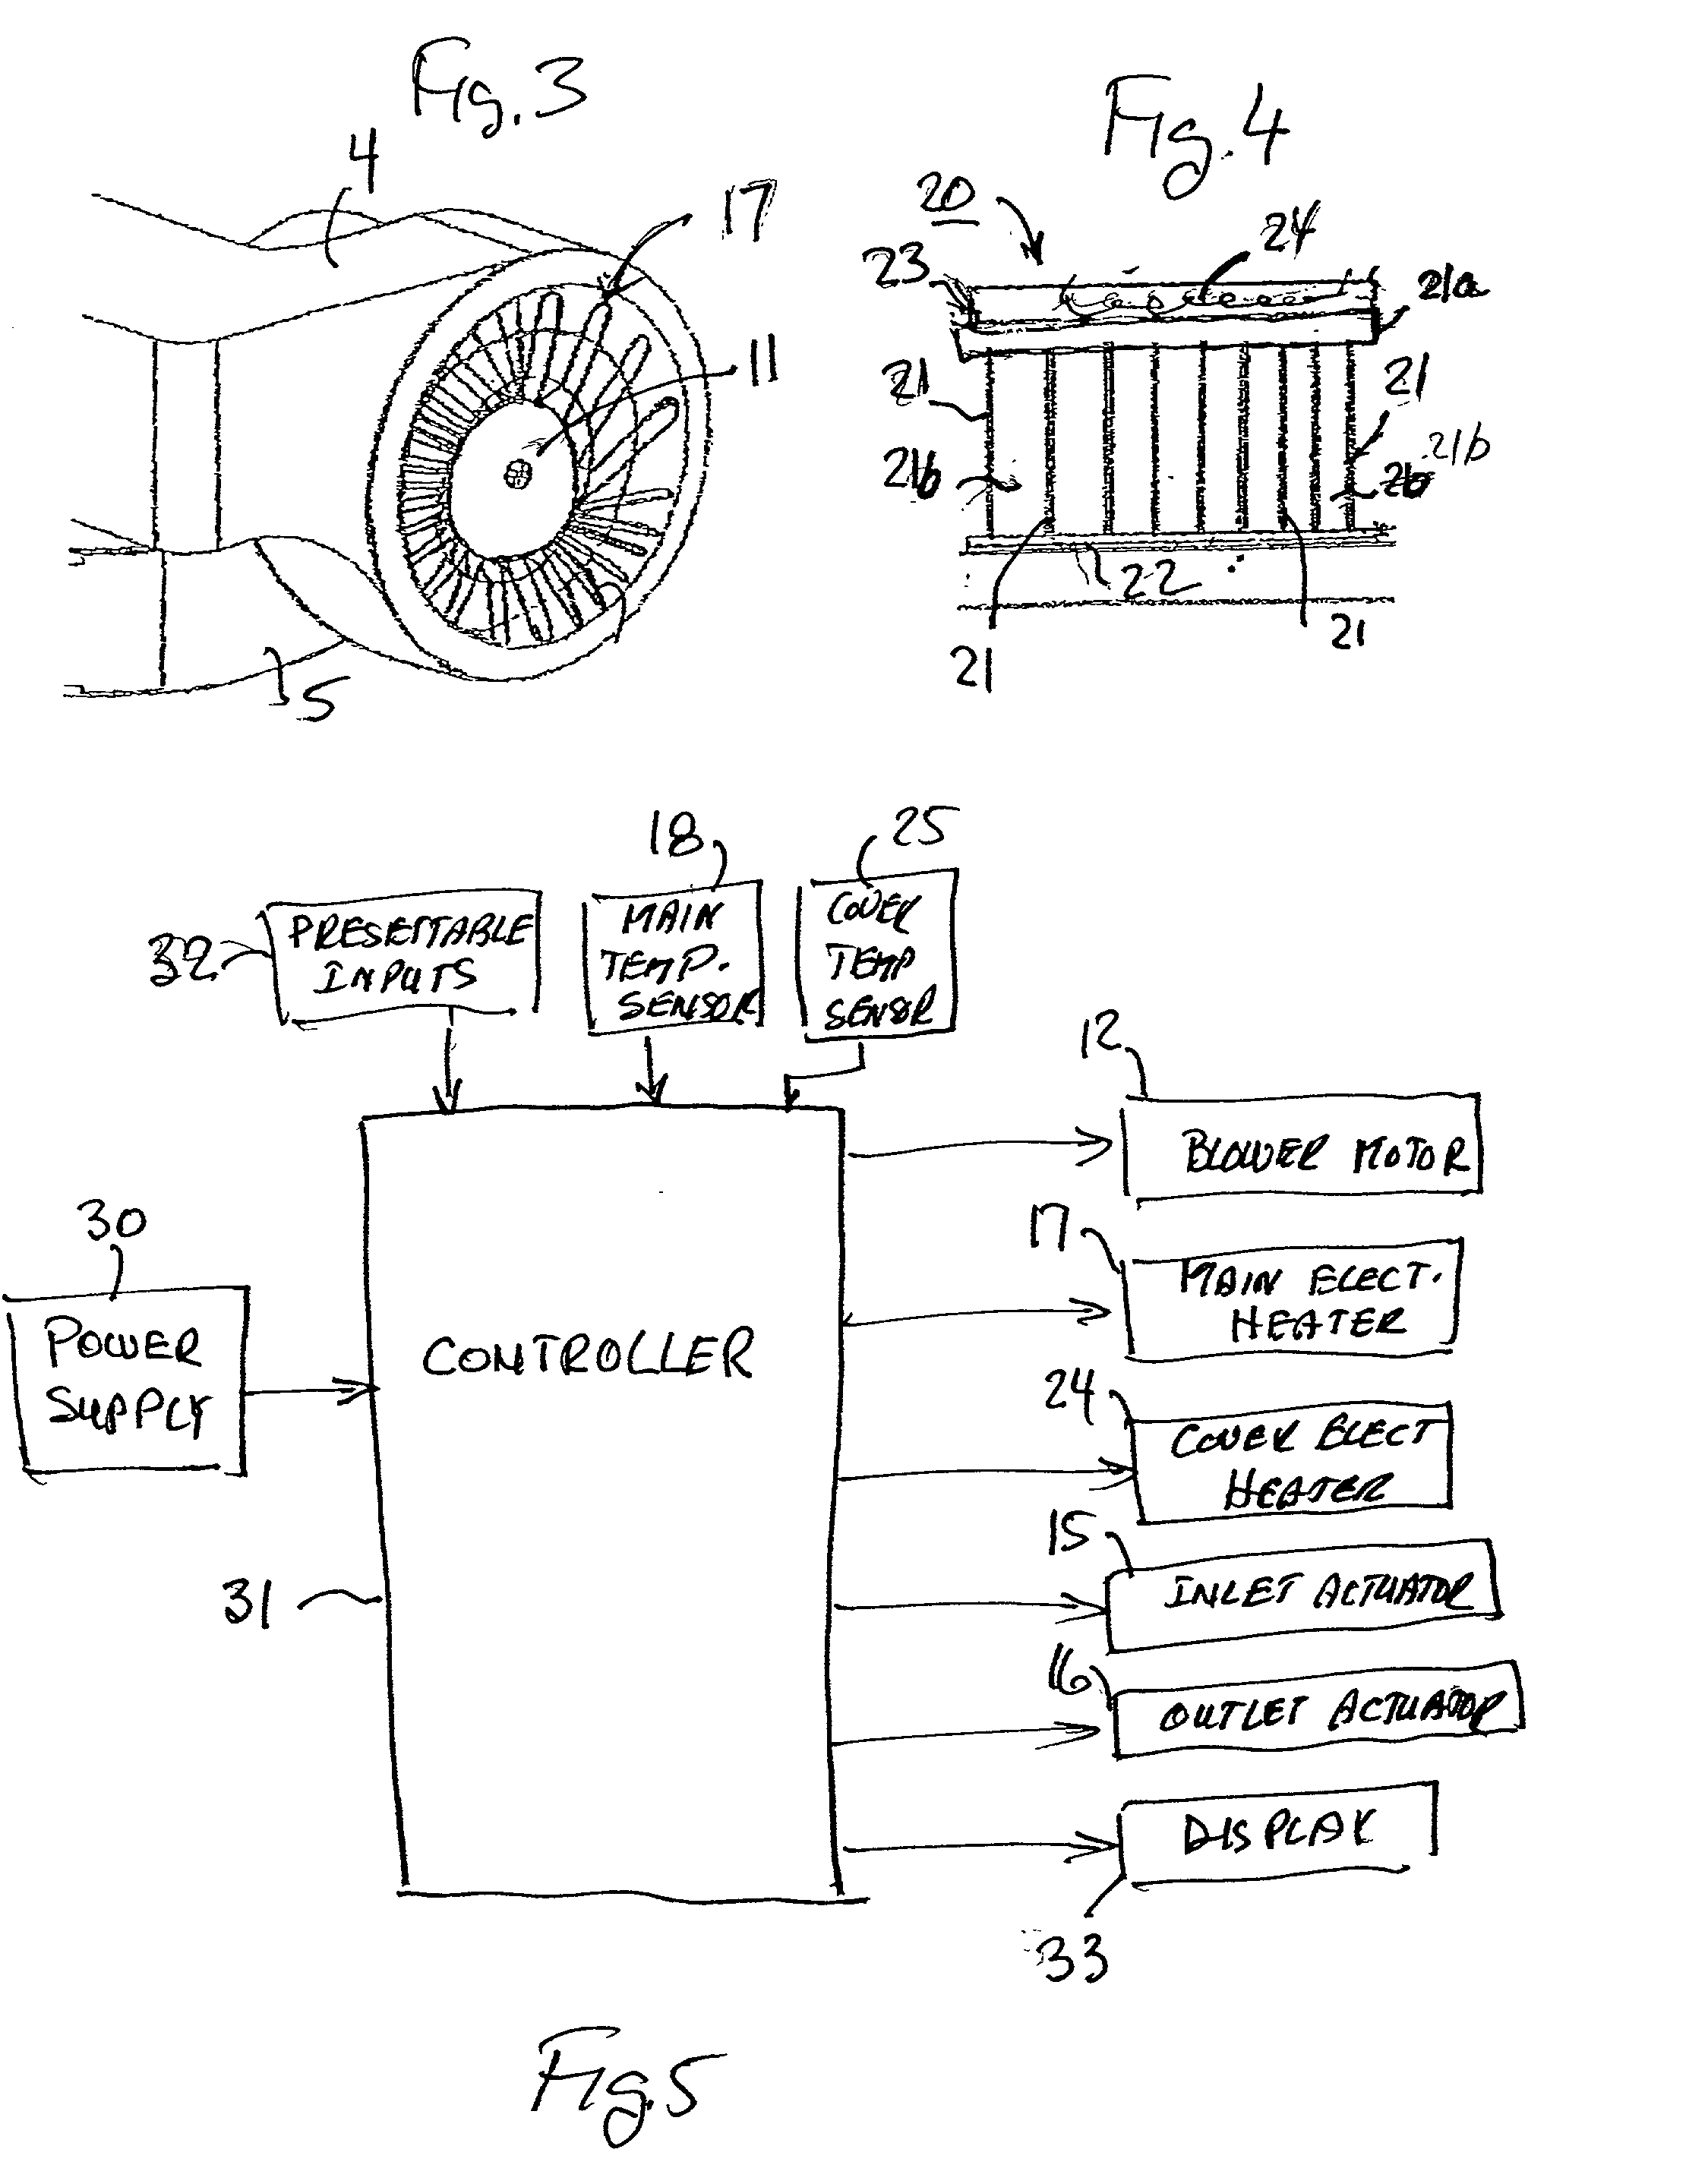 Method and apparatus for effecting rapid thermal cycling of samples in microtiter plate size